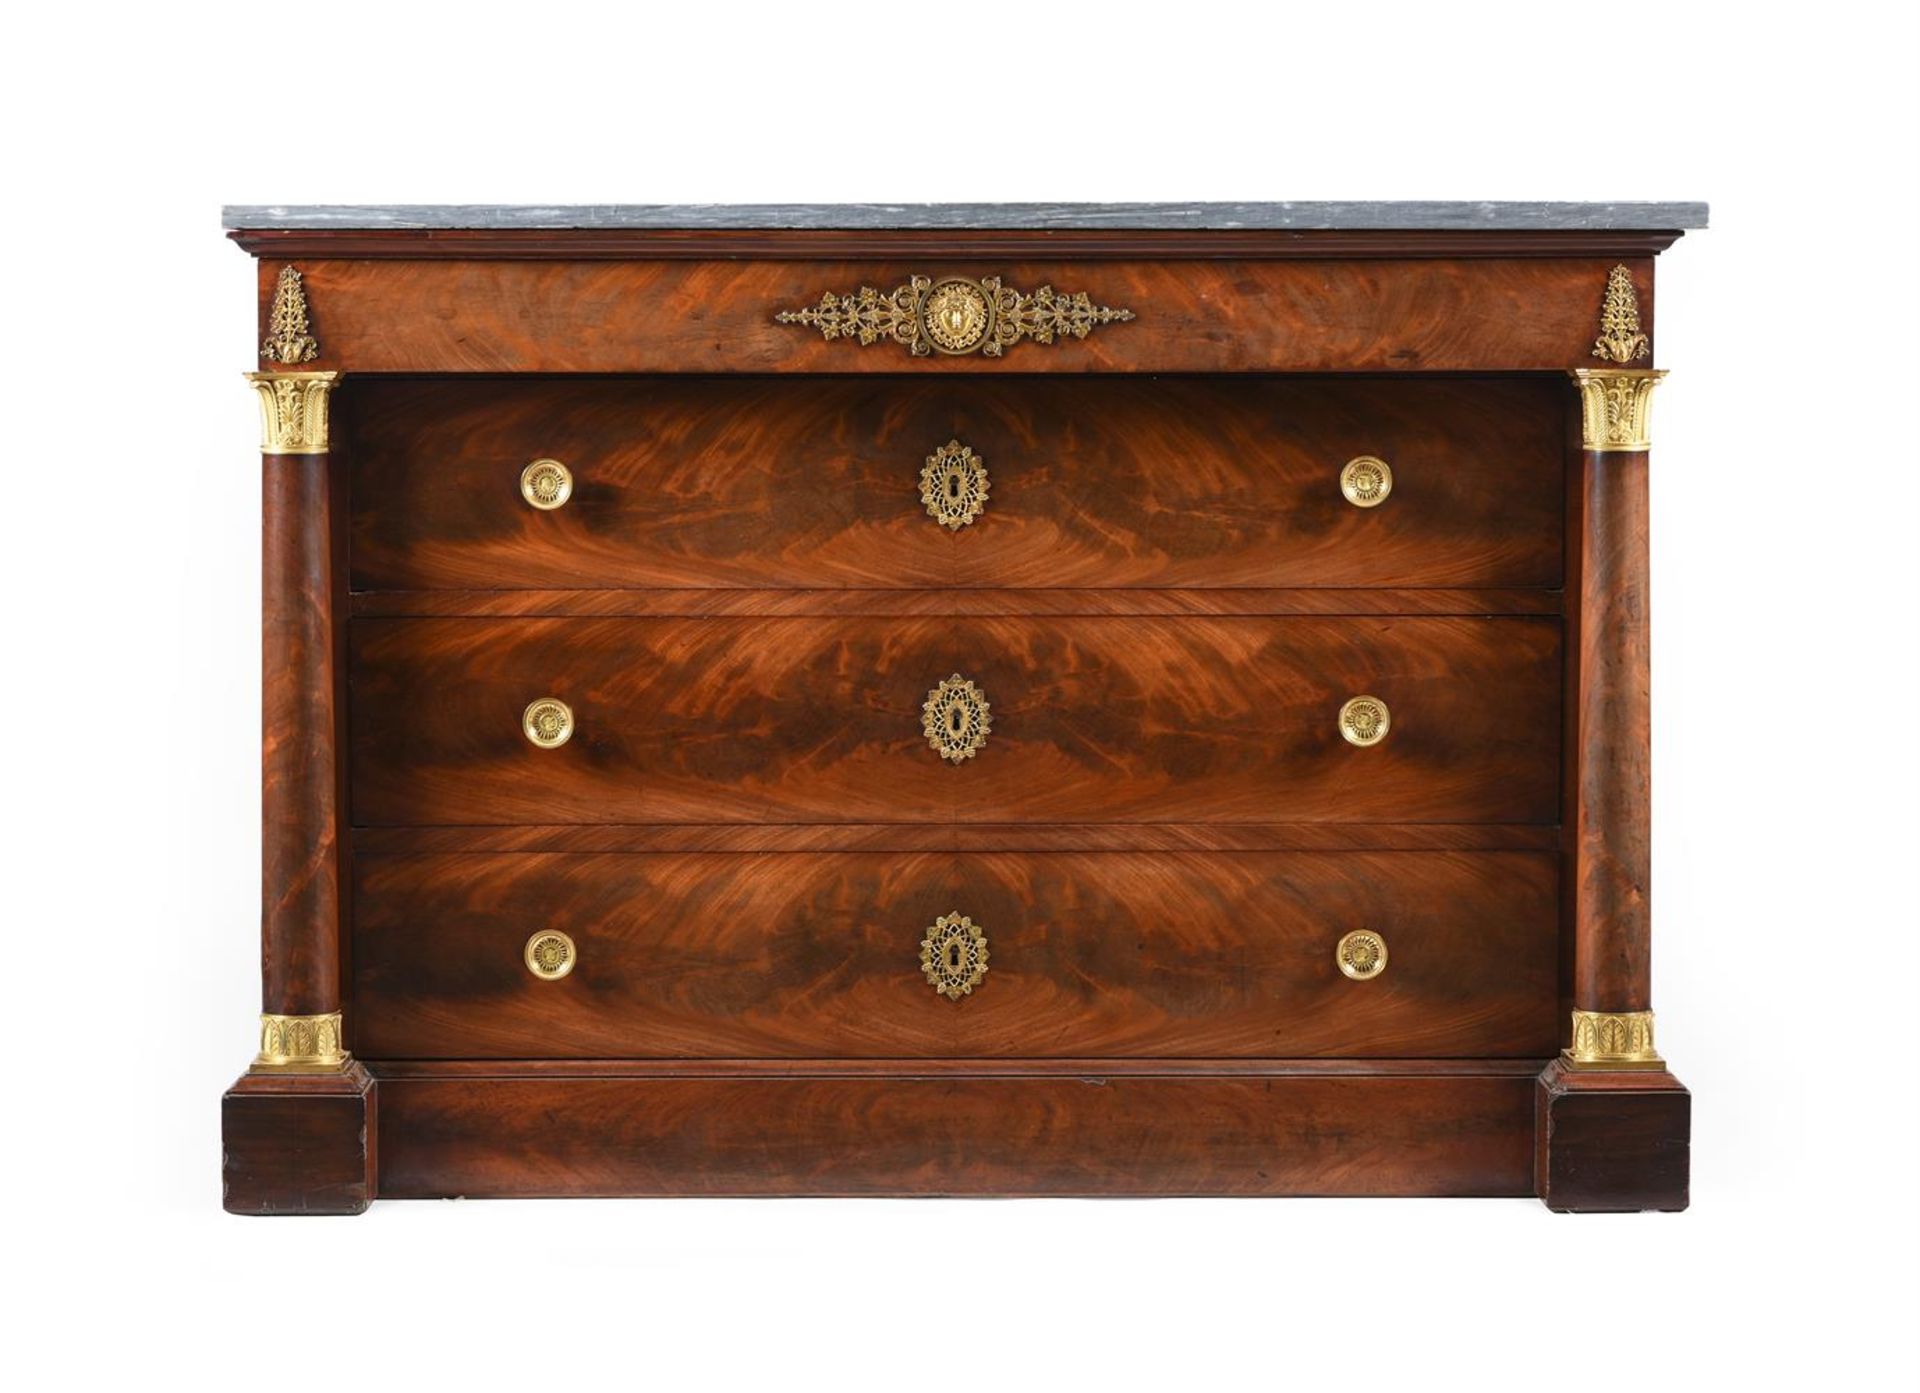 AN EMPIRE MAHOGANY AND ORMOLU MOUNTED COMMODE, IN THE MANNER OF BERNARD MOLITOR